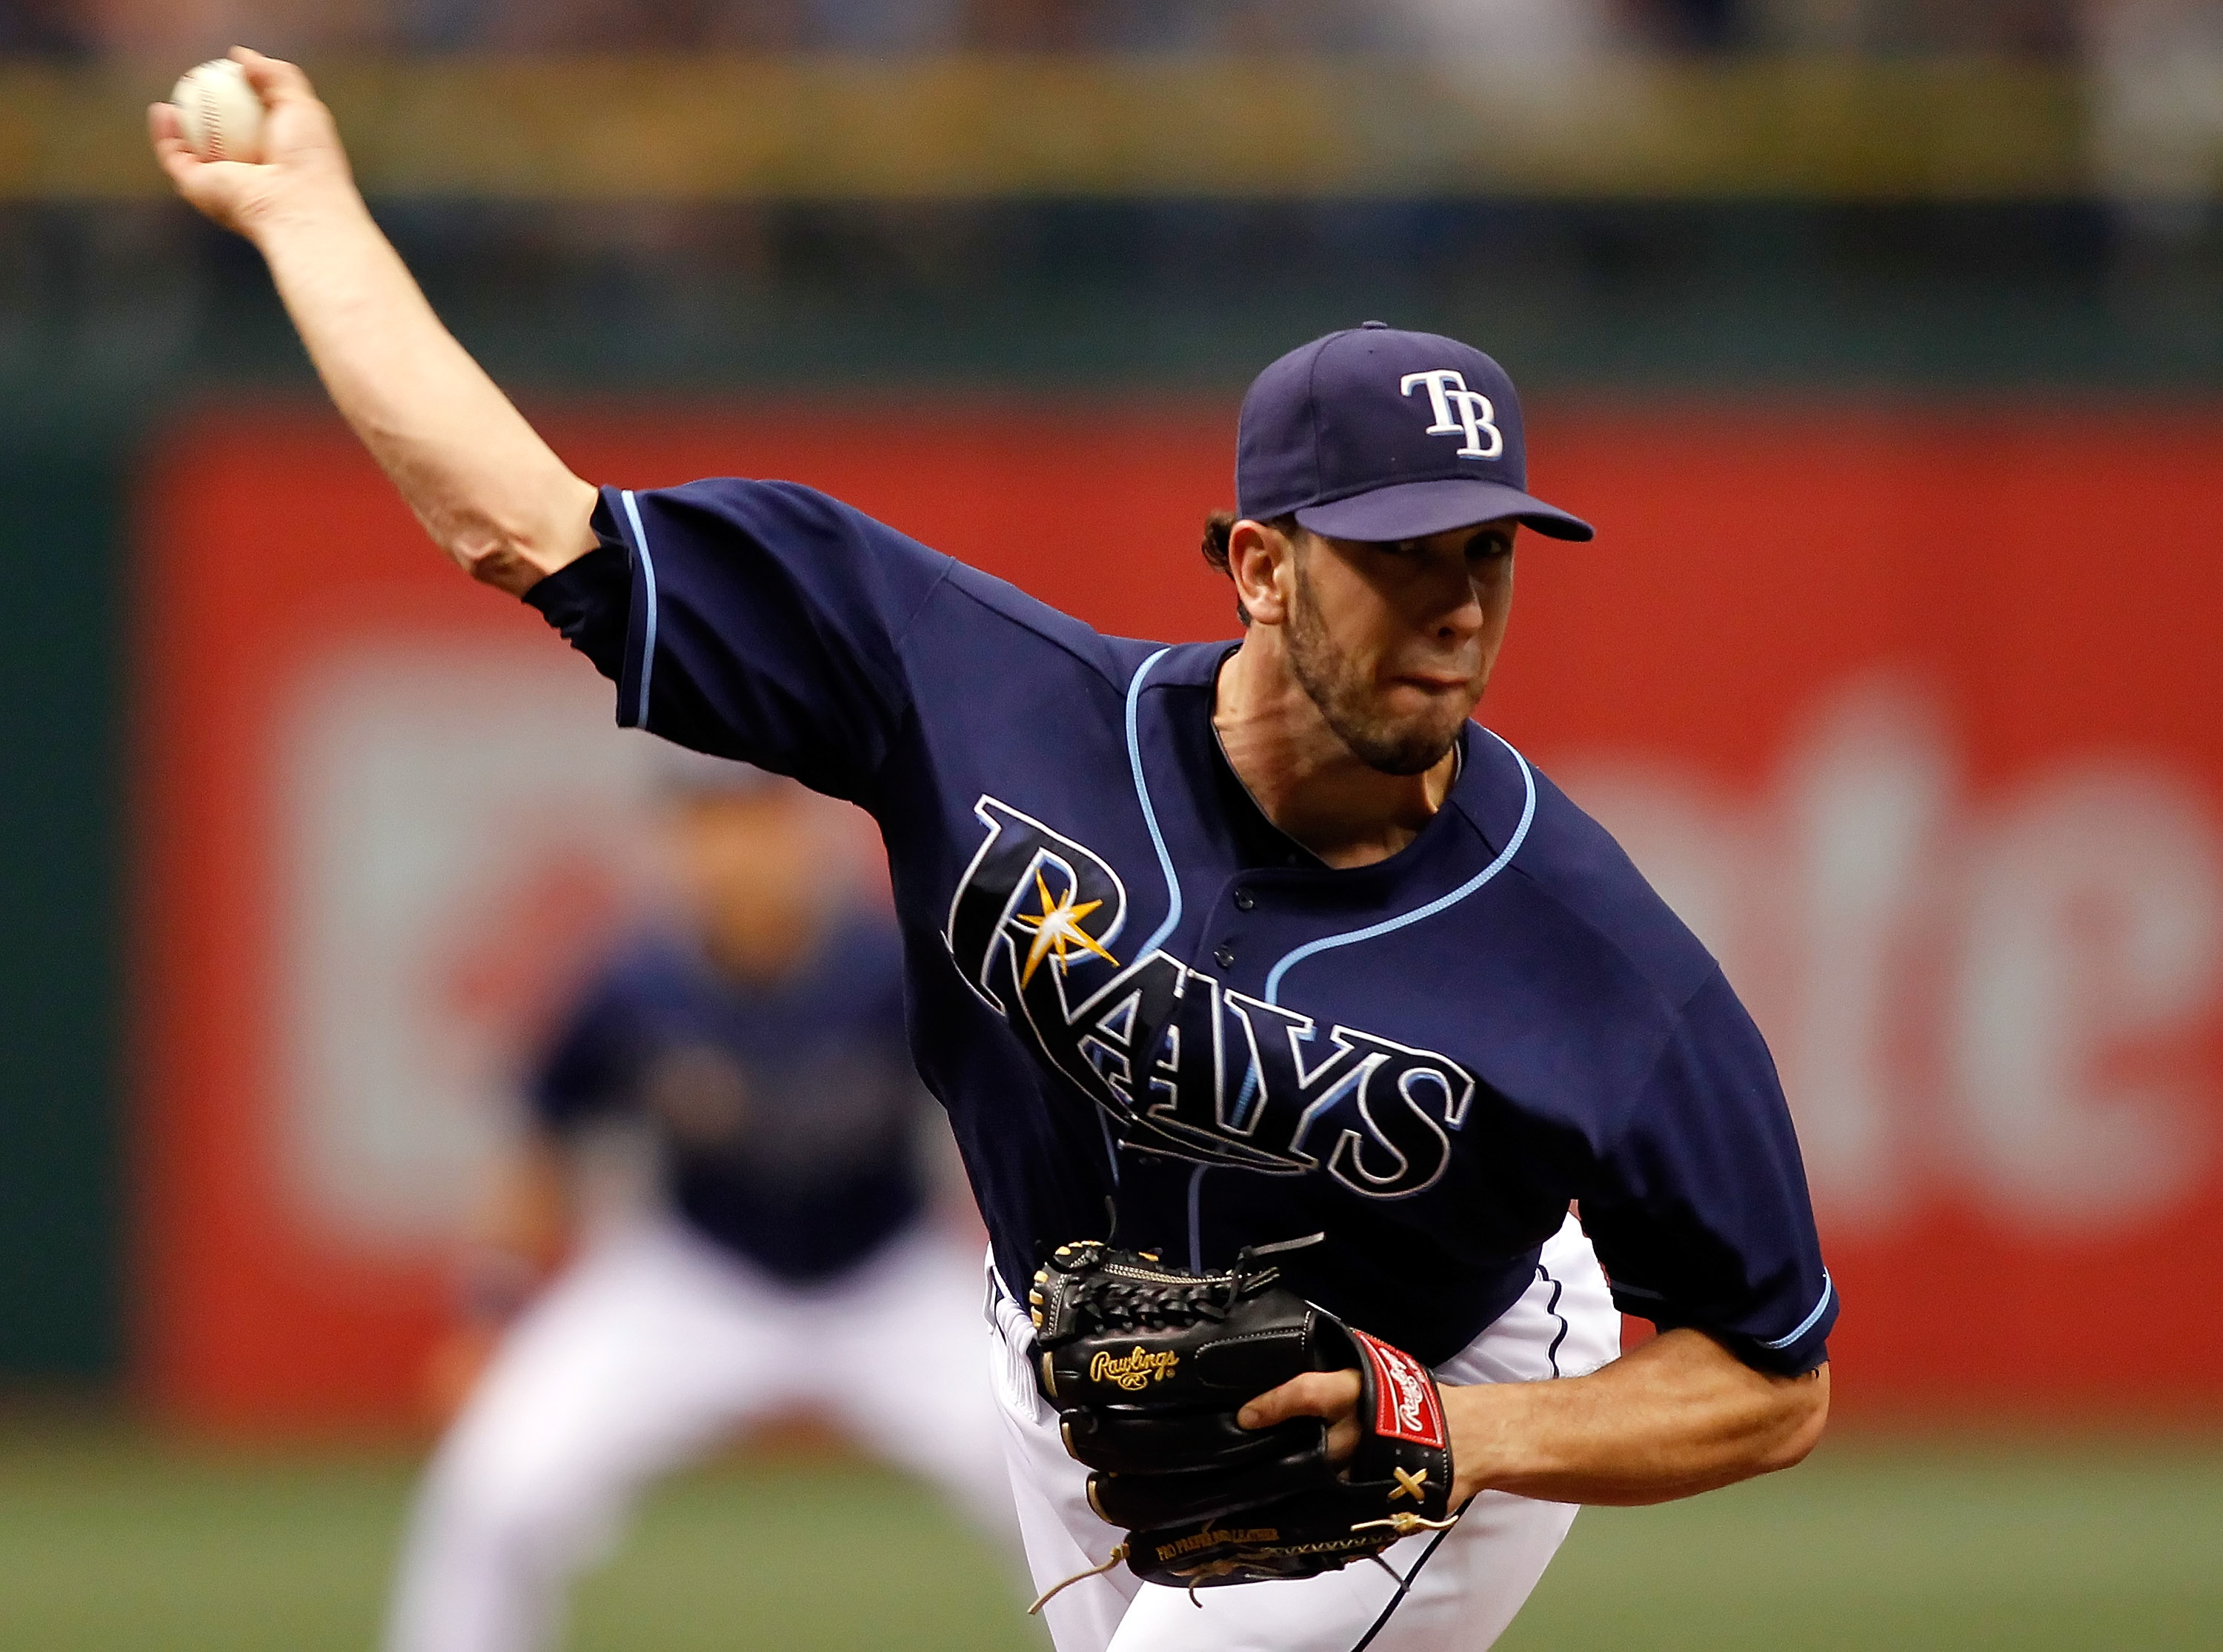 ST PETERSBURG, FL - OCTOBER 07:  Pitcher James Shields #33 of the Tampa Bay Rays pitches against the Texas Rangers during Game 2 of the ALDS at Tropicana Field on October 7, 2010 in St. Petersburg, Florida.  (Photo by J. Meric/Getty Images)